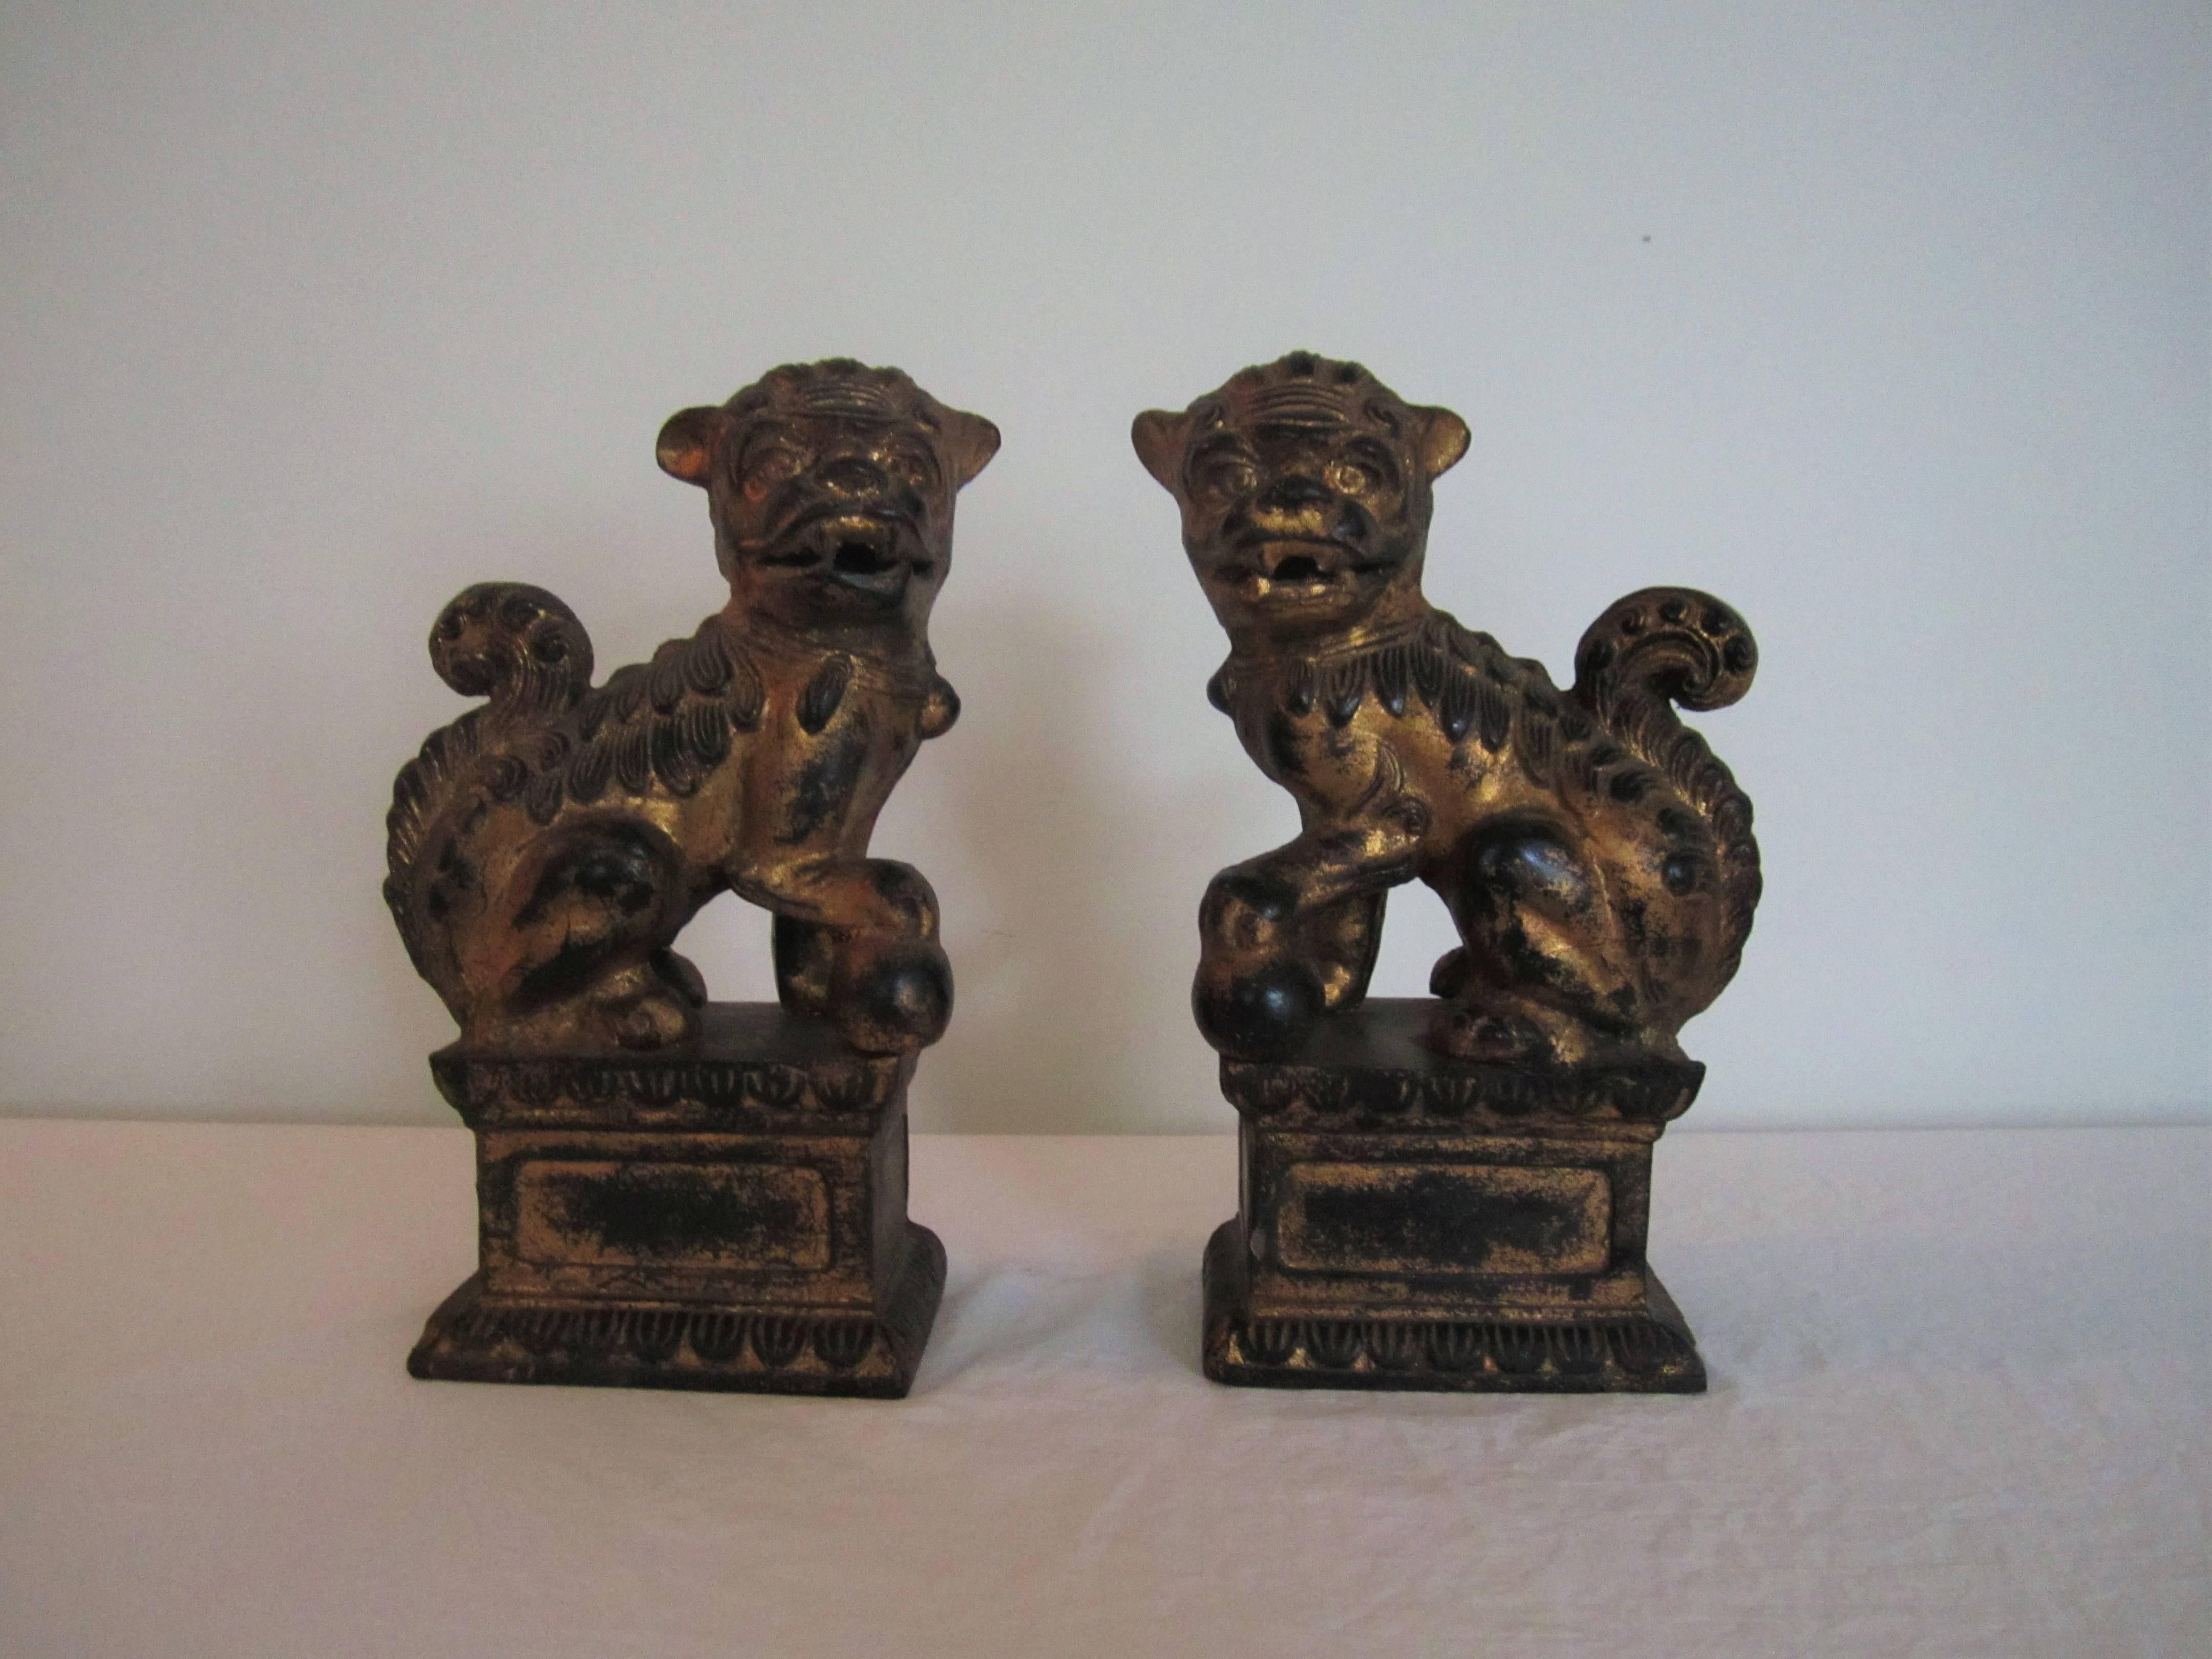 A substantial pair of vintage black and gold foo dogs made of cast iron. Can be used as bookends or stand-alone decorative objects. Measures 10